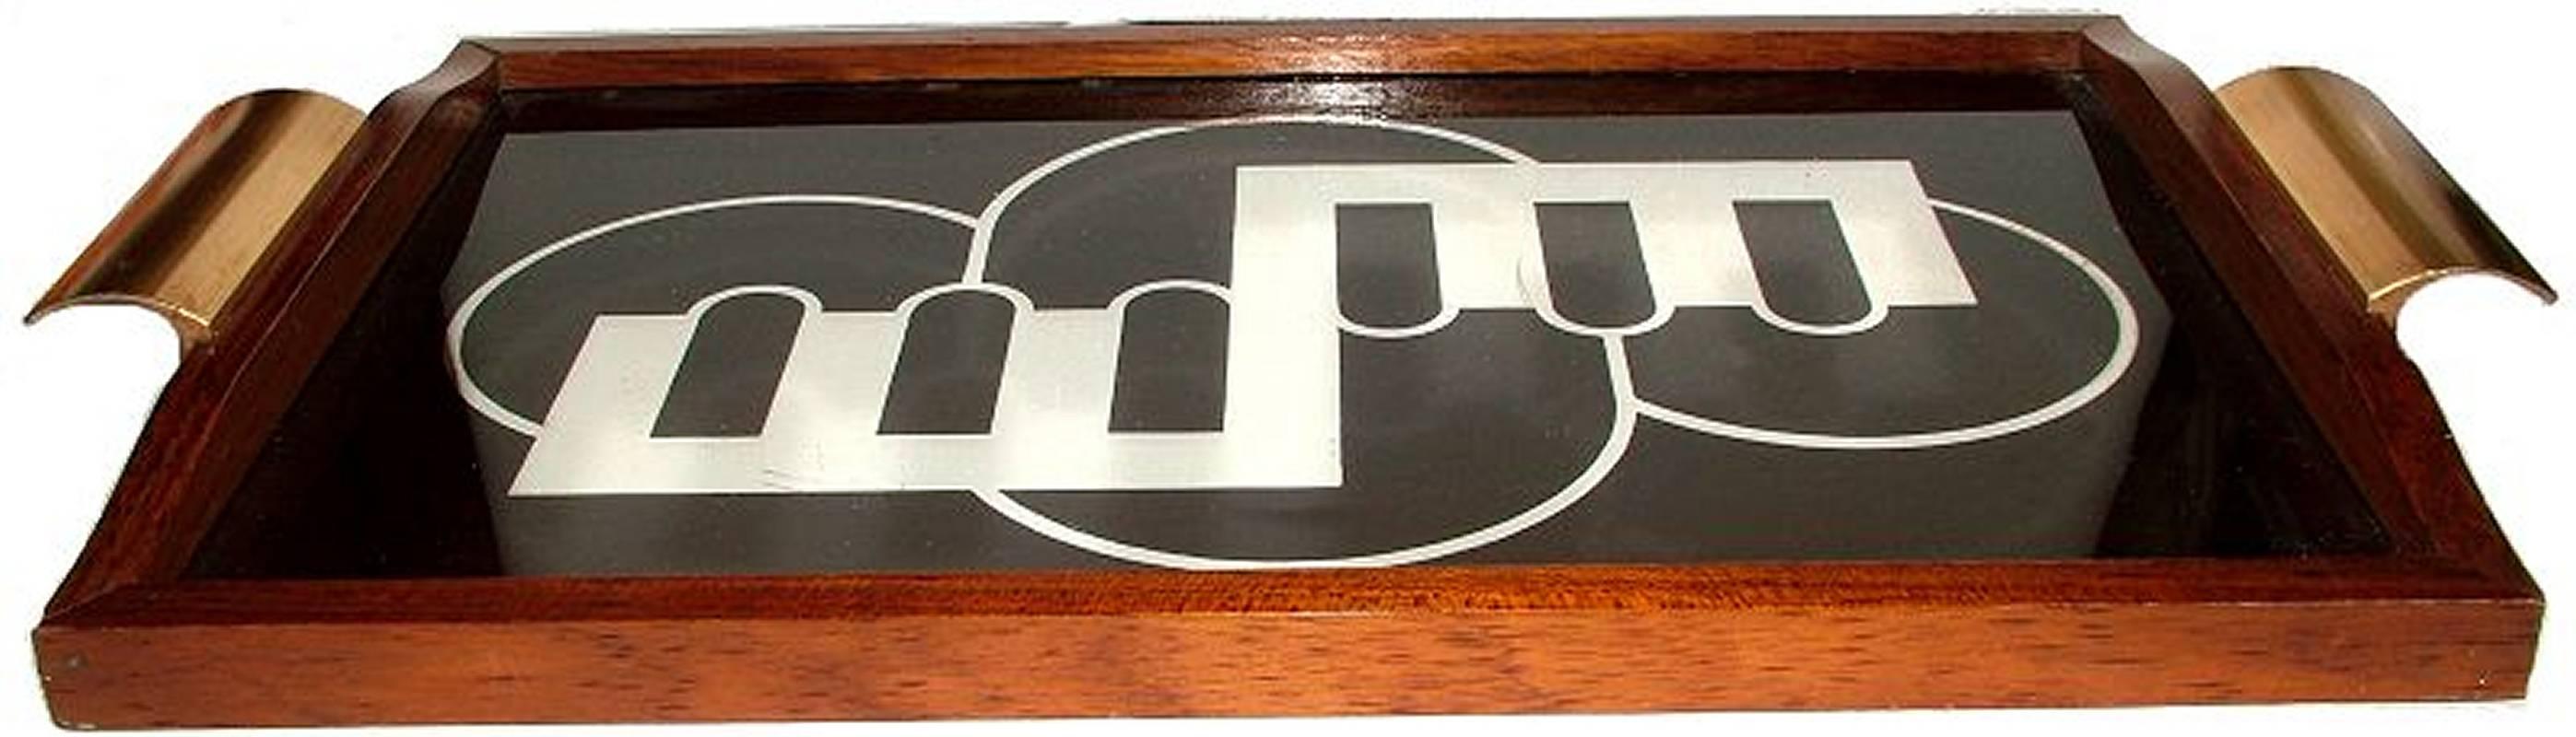 For your consideration is this 1930s Art Deco drinks tray with a fabulous reverse painted geometric design. Condition is excellent with no damage to report. Ideal size for modern use and perfect also for using as display.